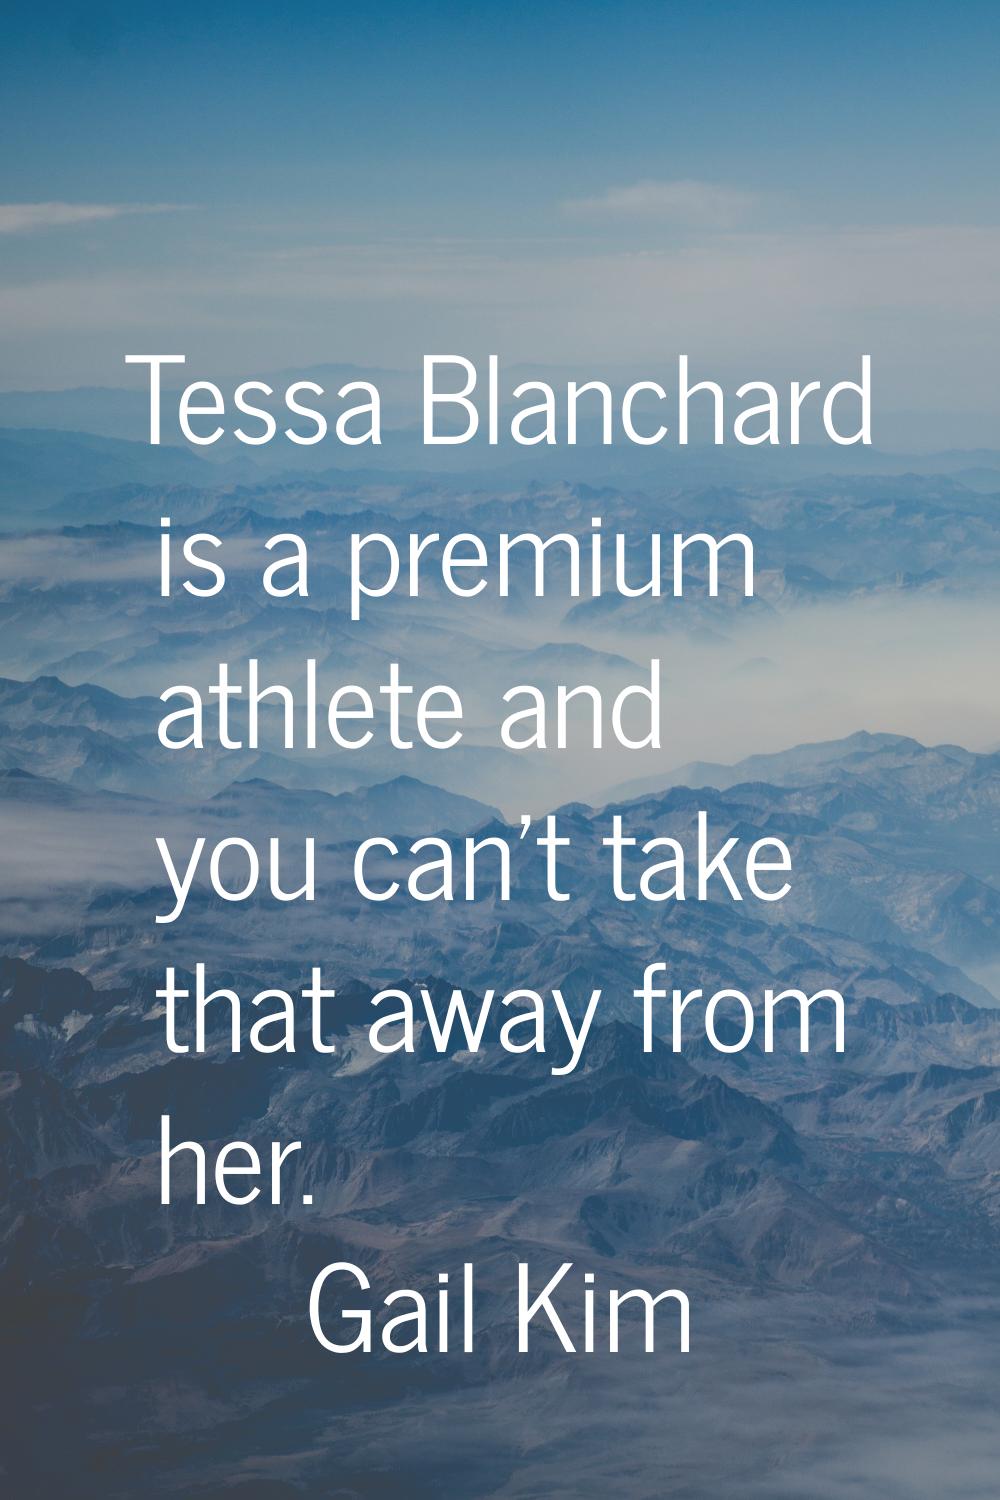 Tessa Blanchard is a premium athlete and you can't take that away from her.